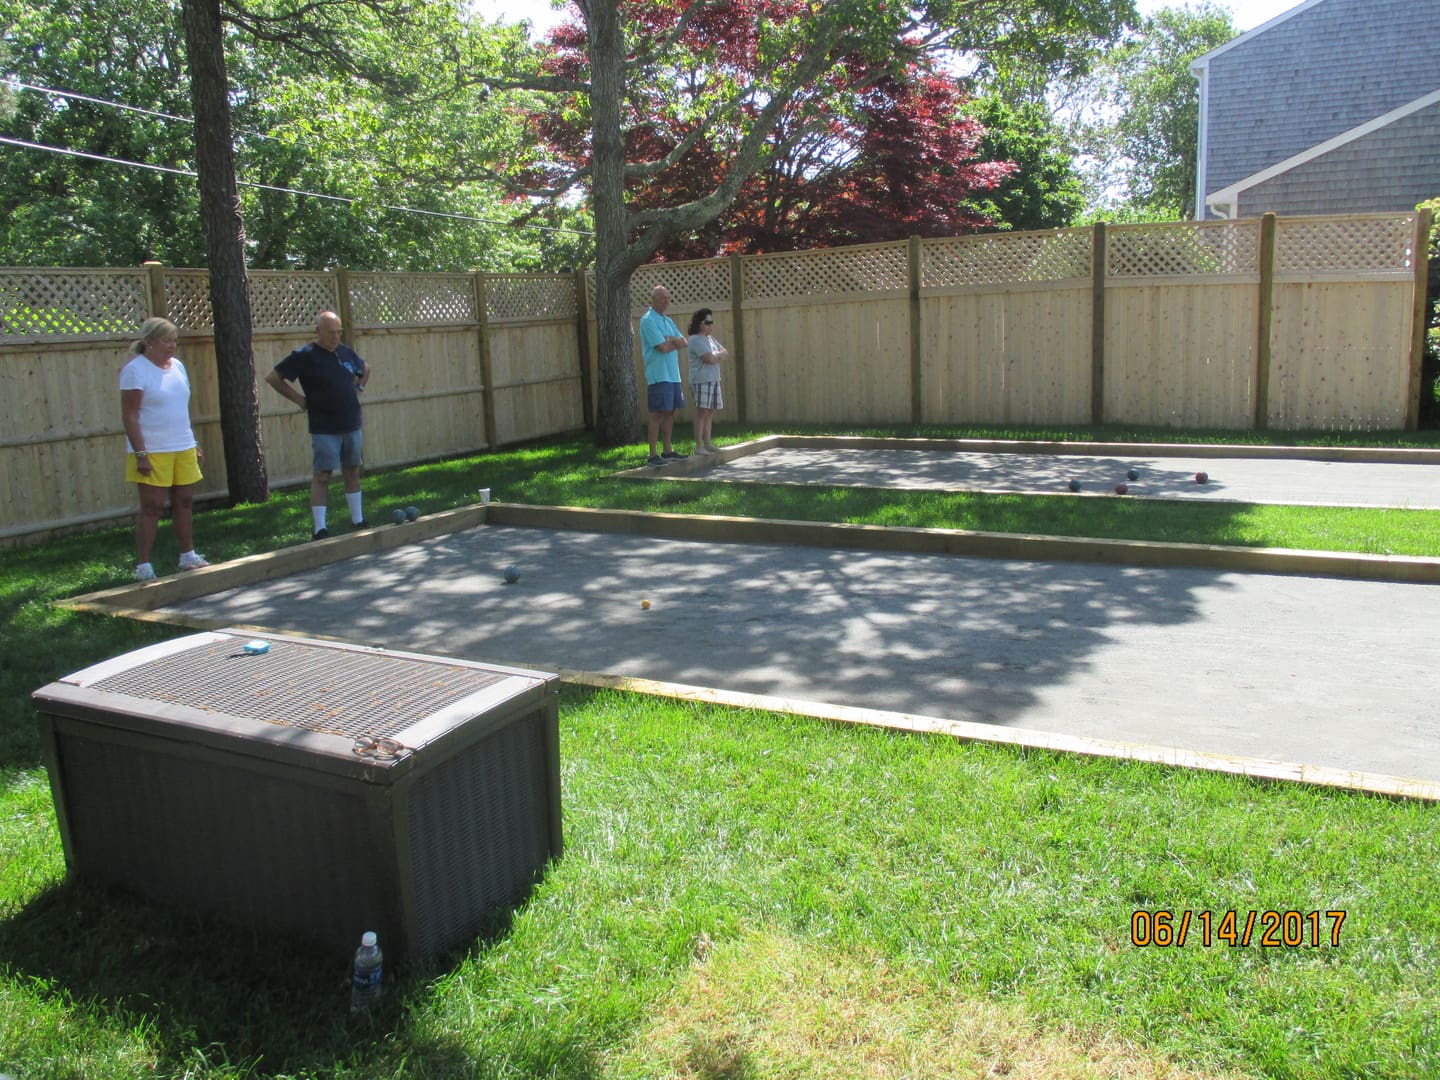 A man and woman playing a game of bocce ball.